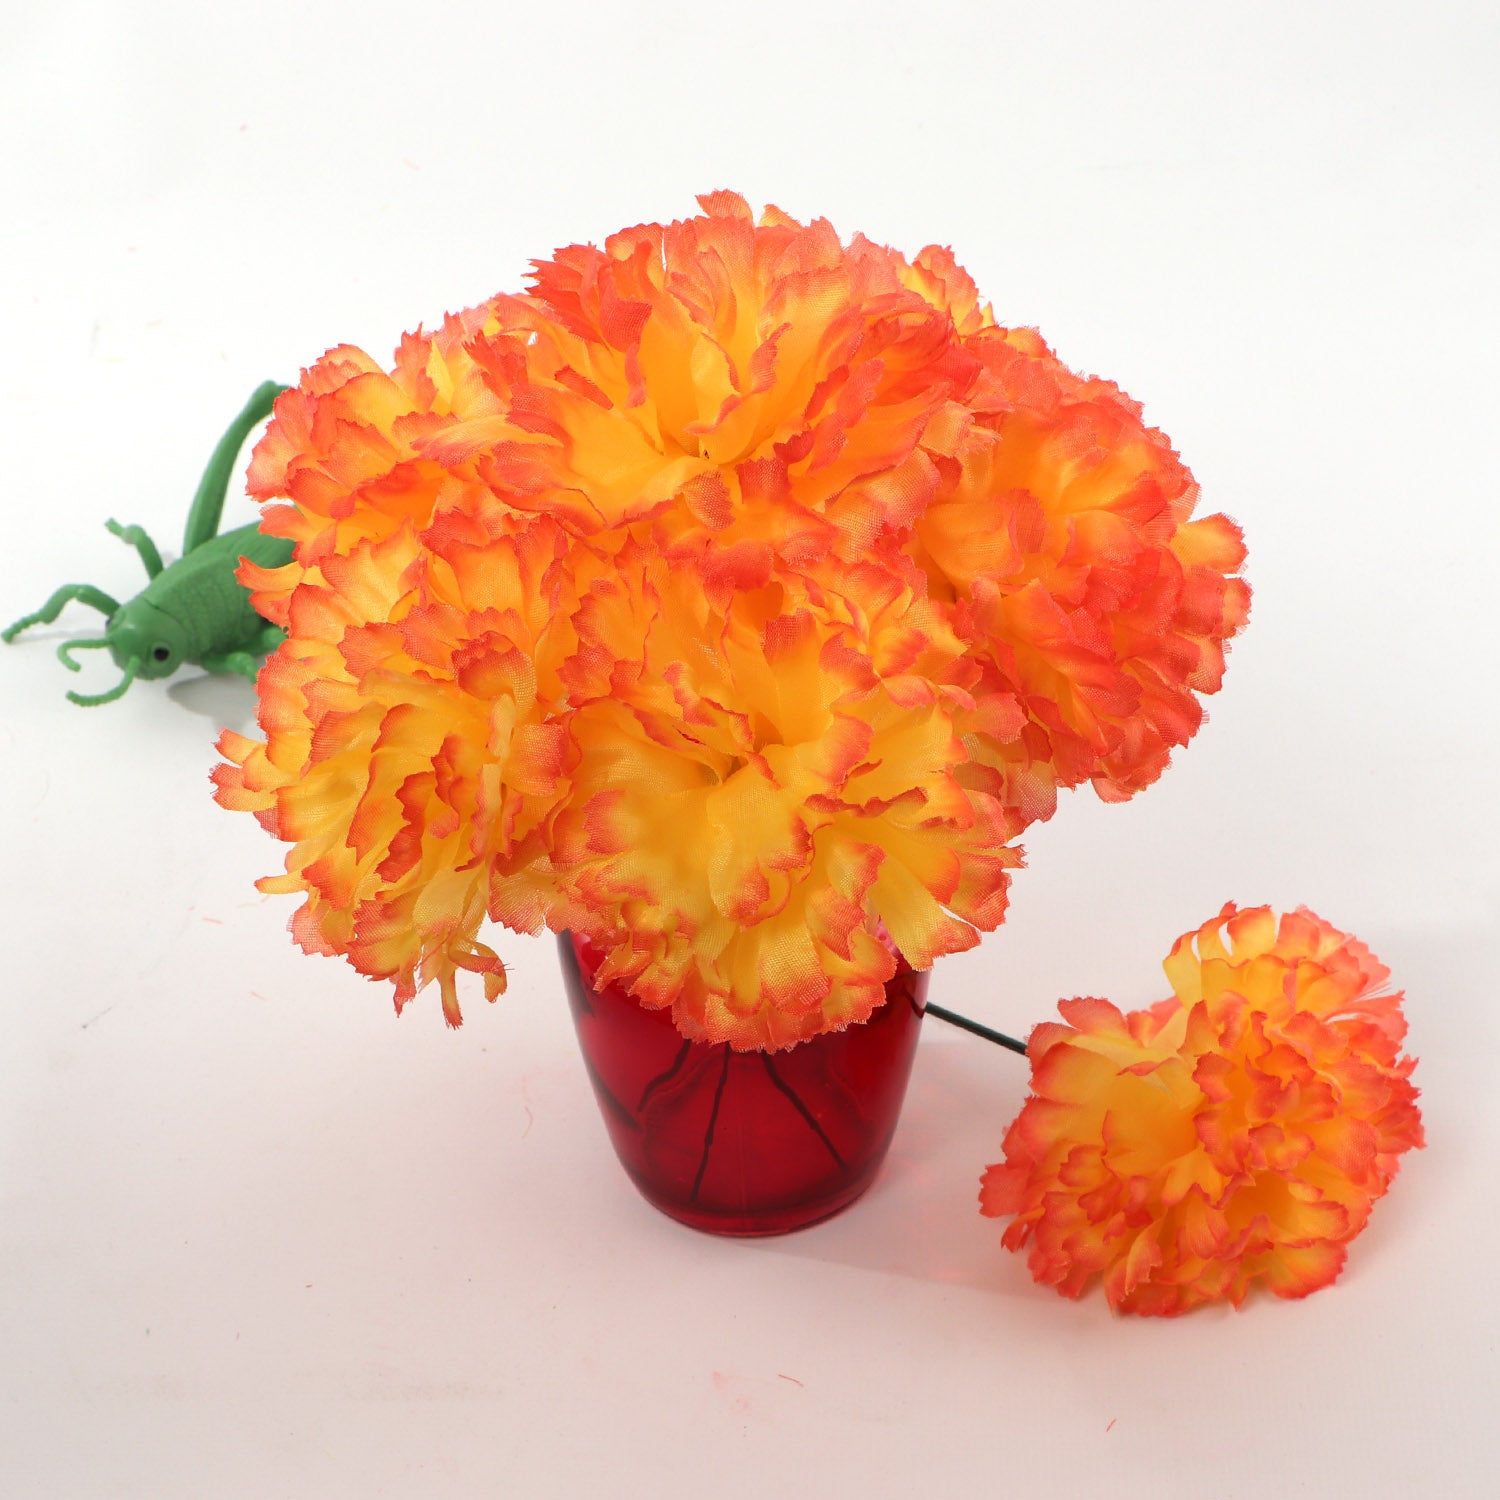 Artificial Silk Carnation Picks with 3.5" Flower Heads & 5" Stems (100 Box Pack)